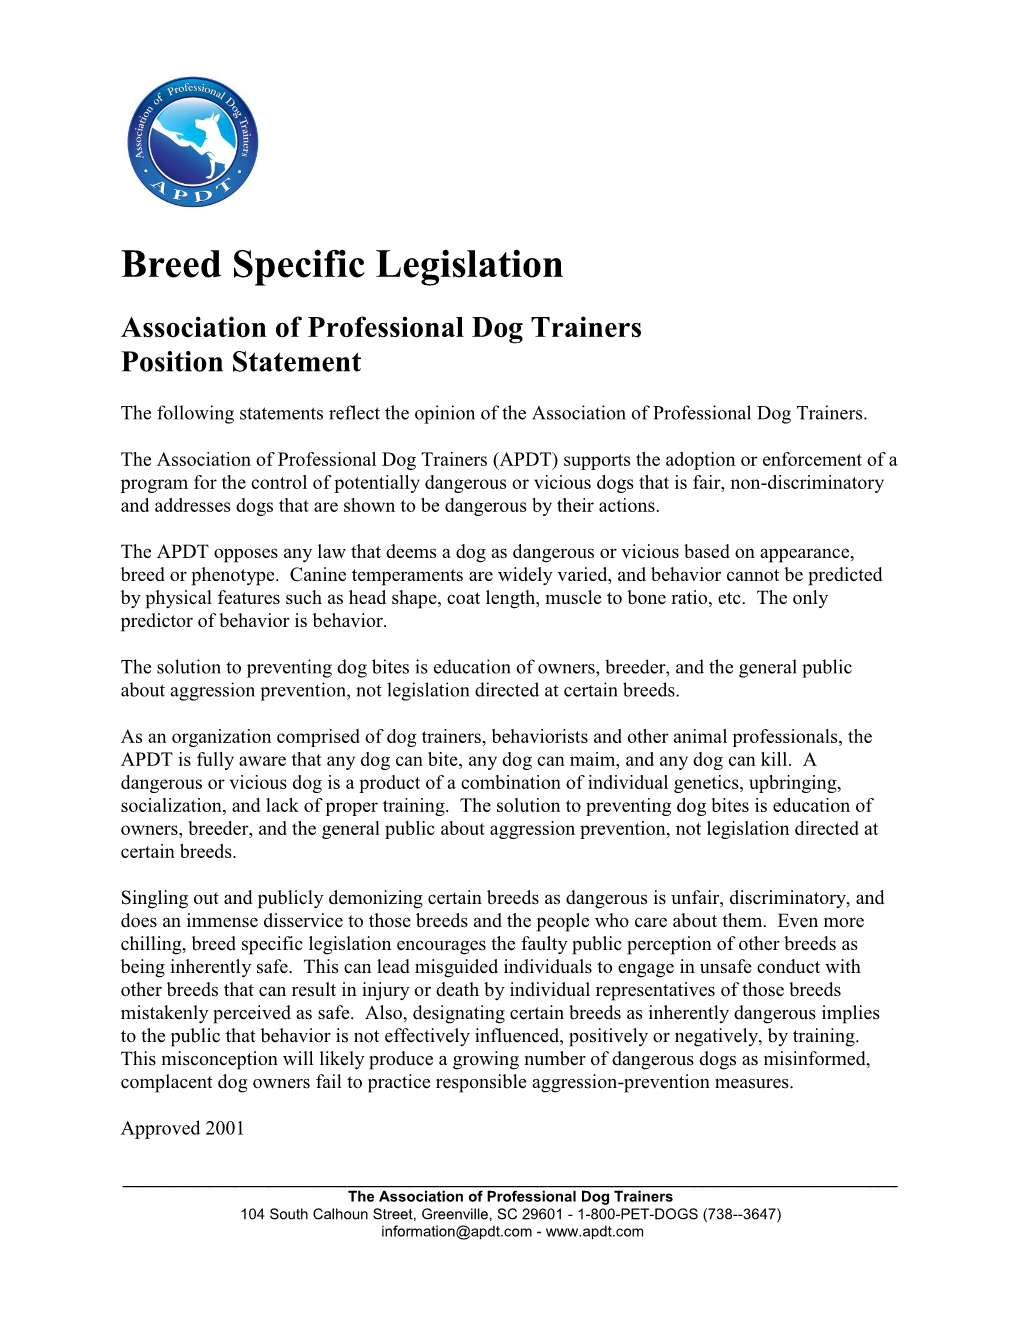 Breed Specific Legislation Association of Professional Dog Trainers Position Statement